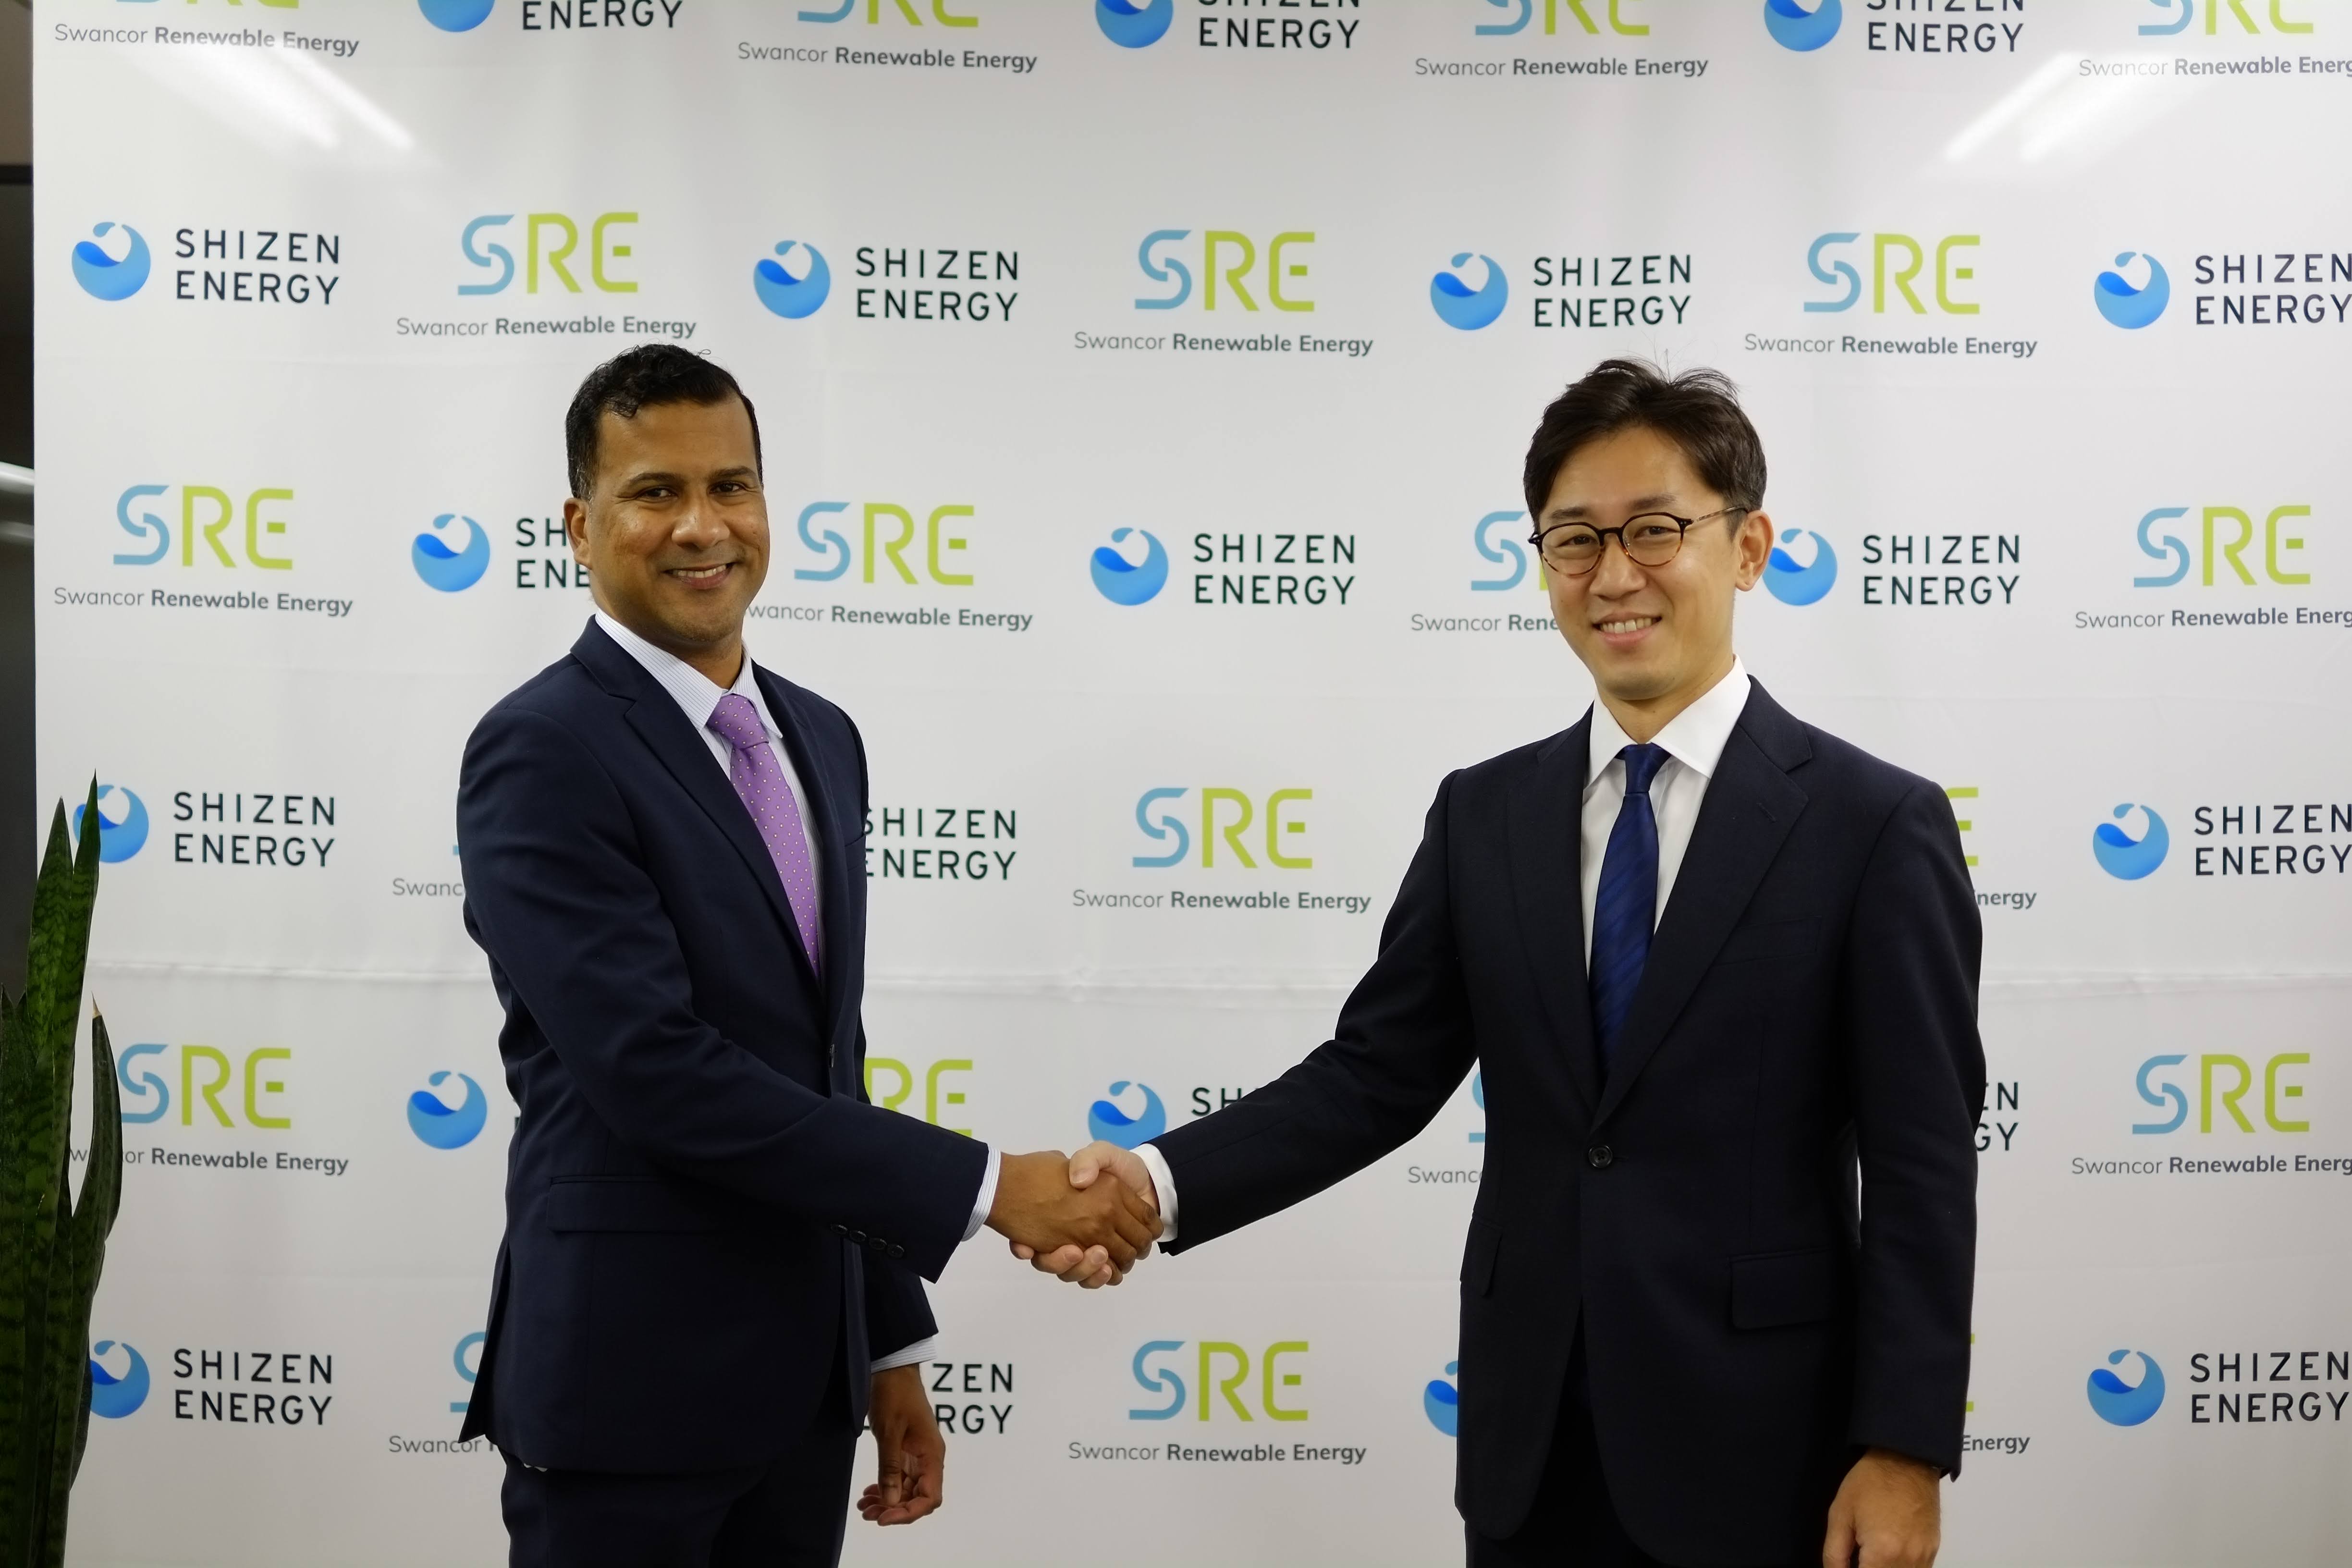 Shizen Energy and Swancor Renewable Energy agreed on joint development of offshore wind project